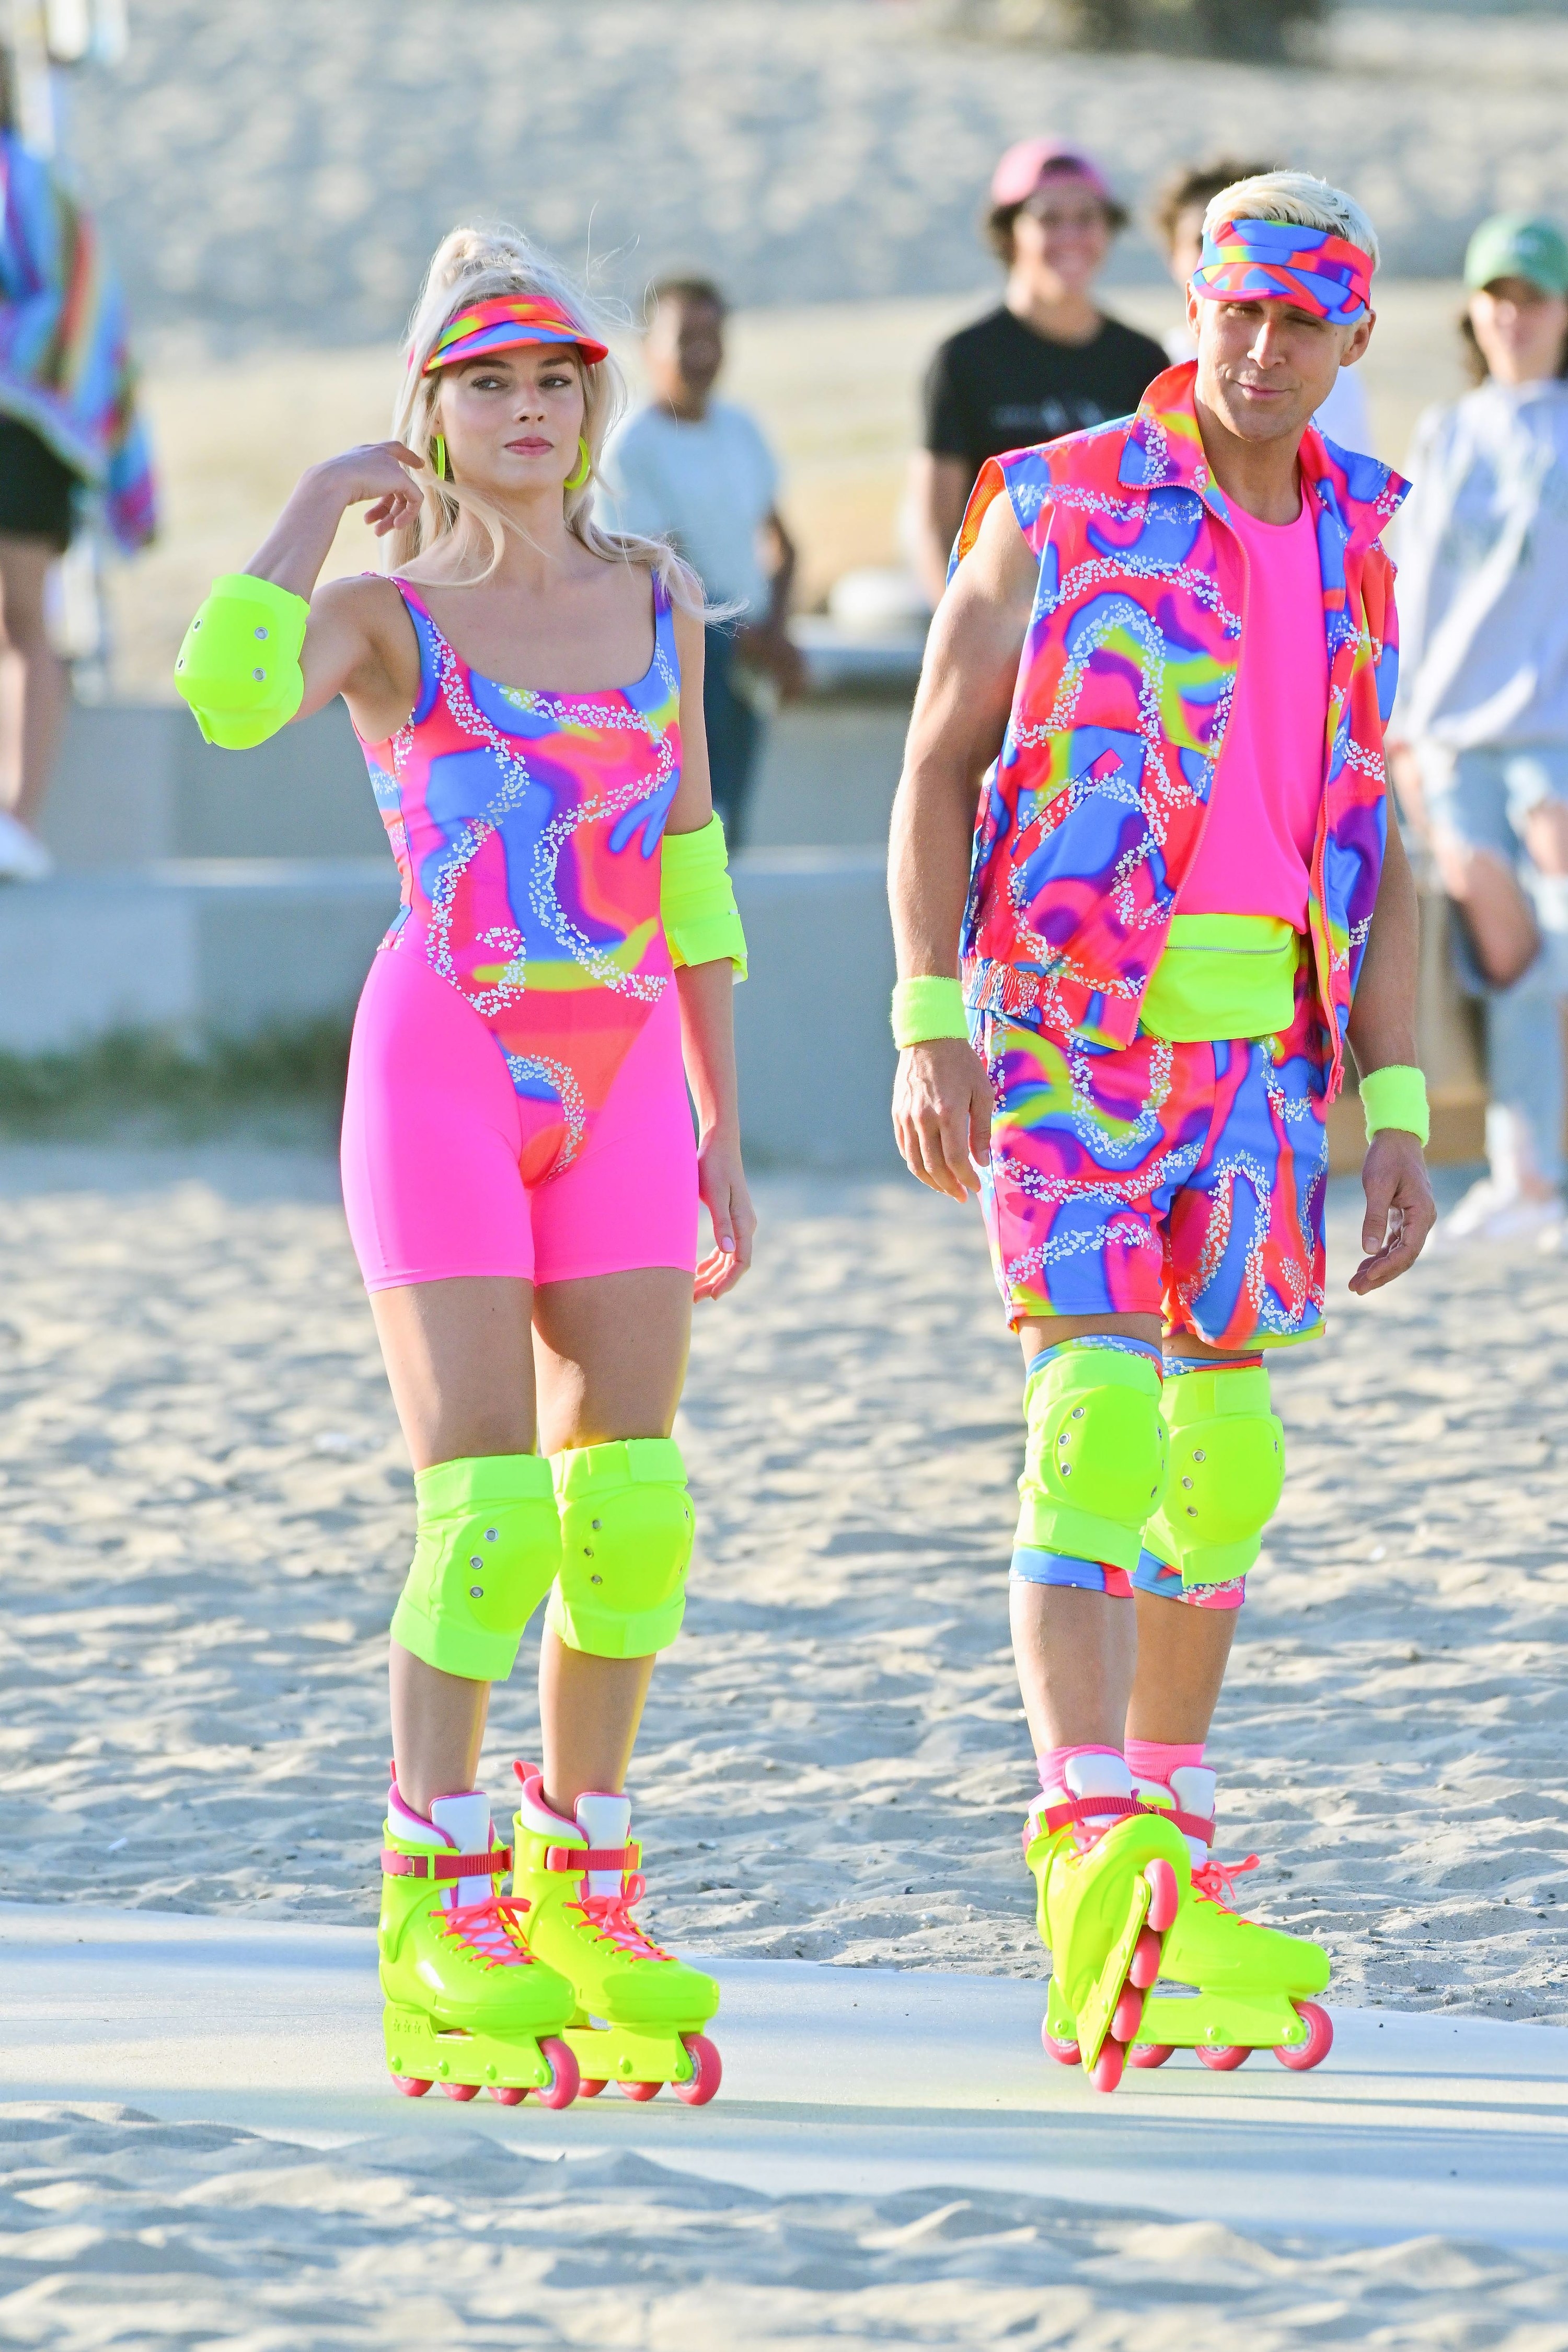 Margot and Ryan roller-skating in matching neon-colored outfits that include knee pads and visors